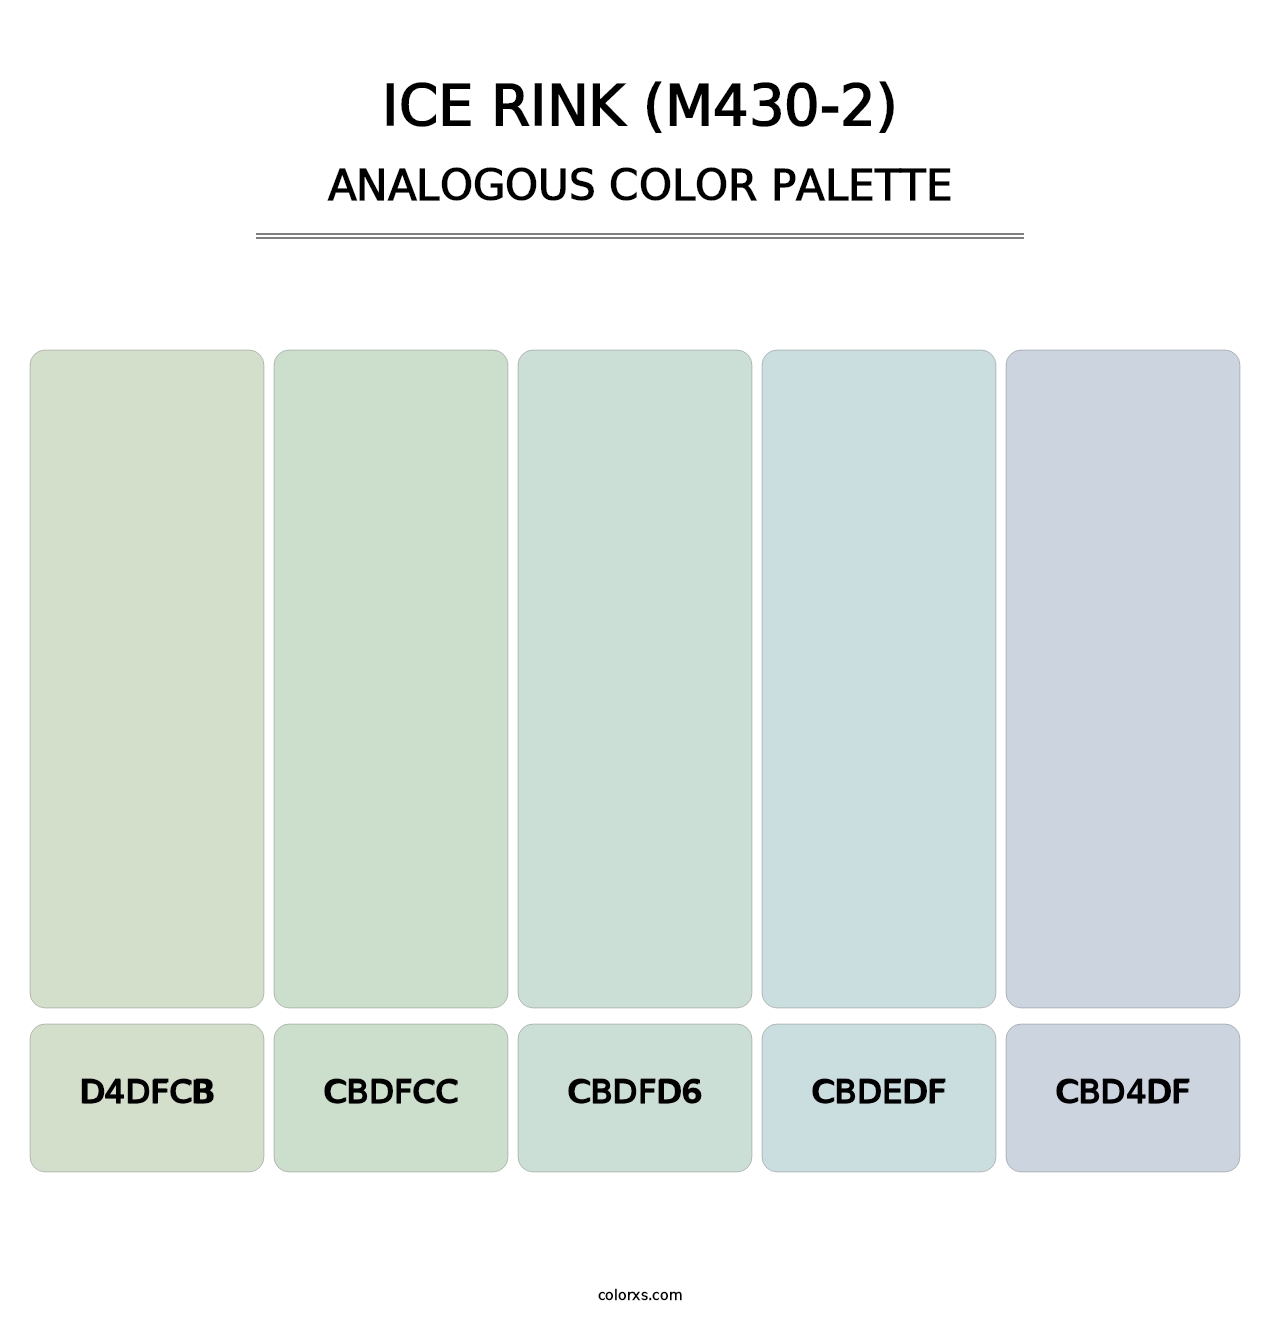 Ice Rink (M430-2) - Analogous Color Palette